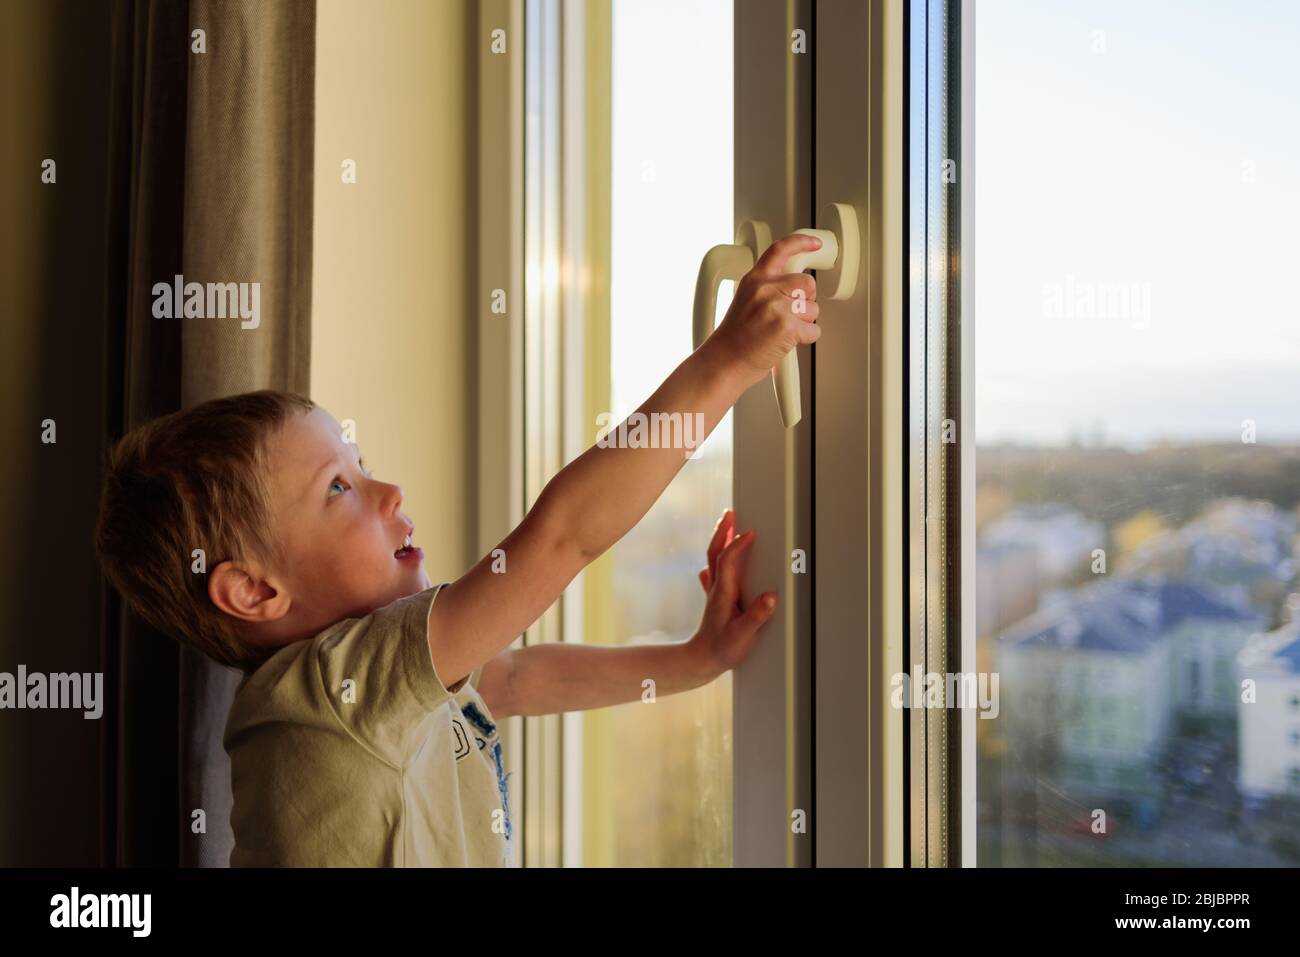 Child opening window without parents, holding handle. Dangerous situation Stock Photo